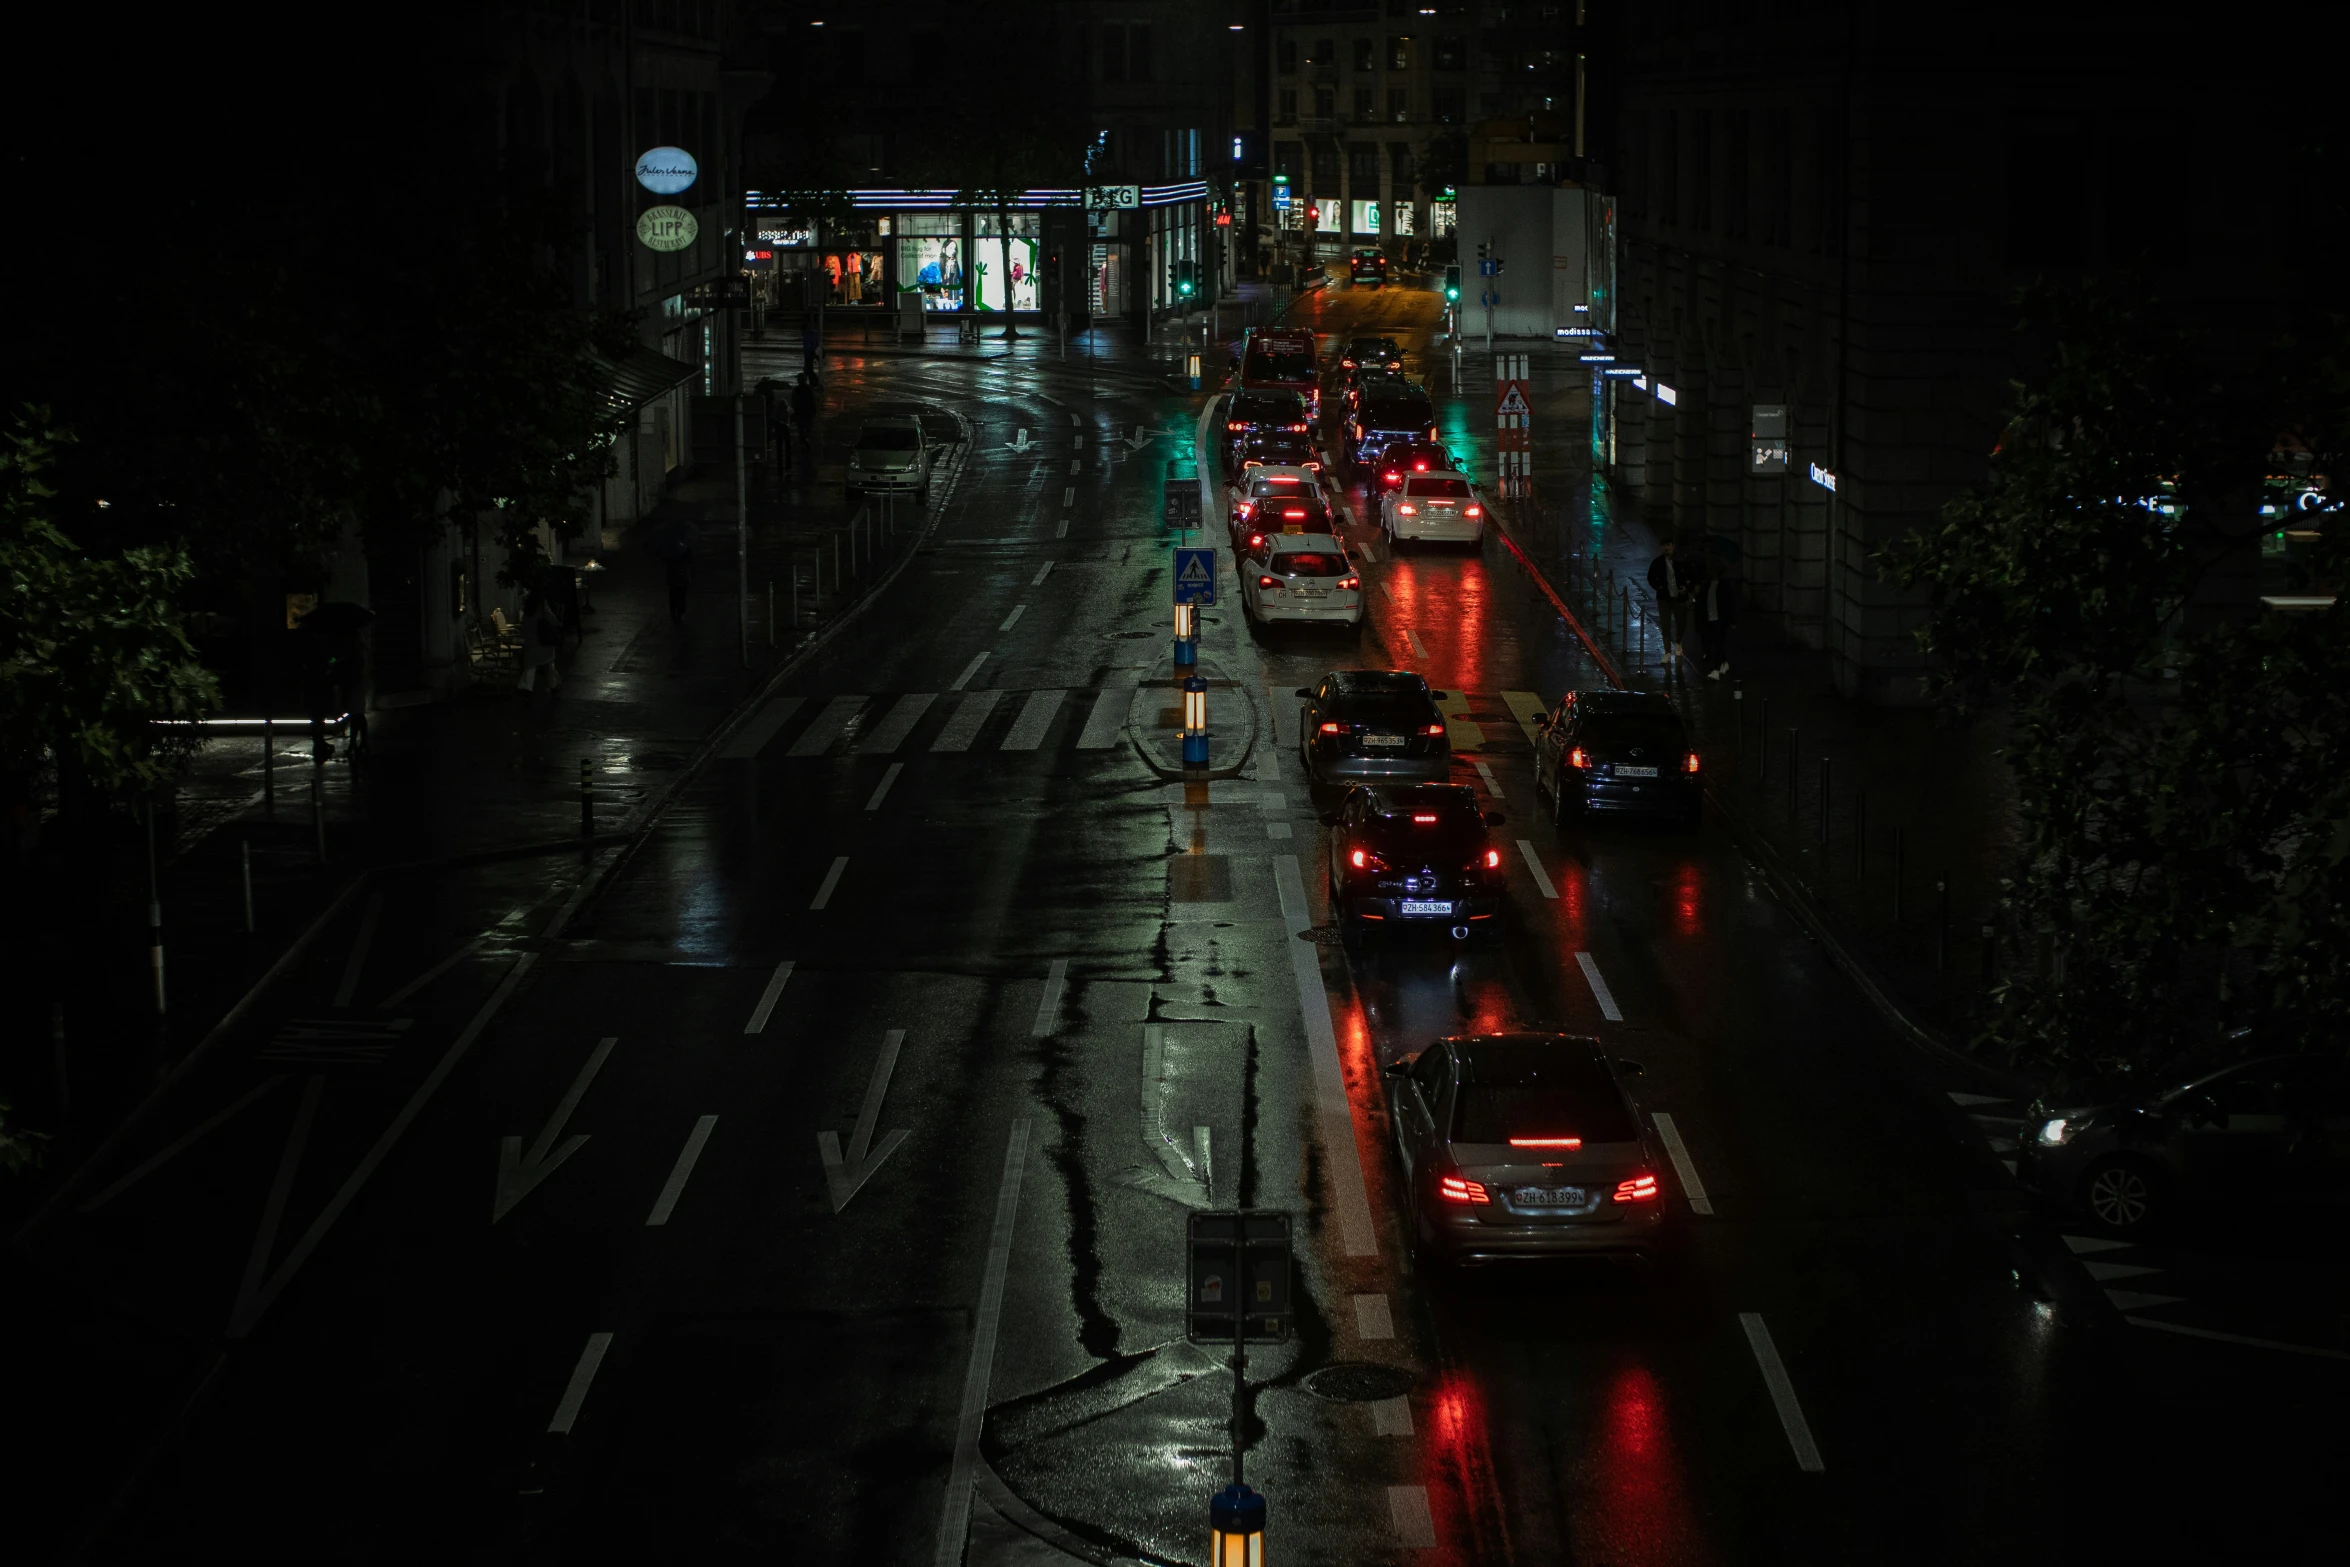 traffic is backed up on a street at night